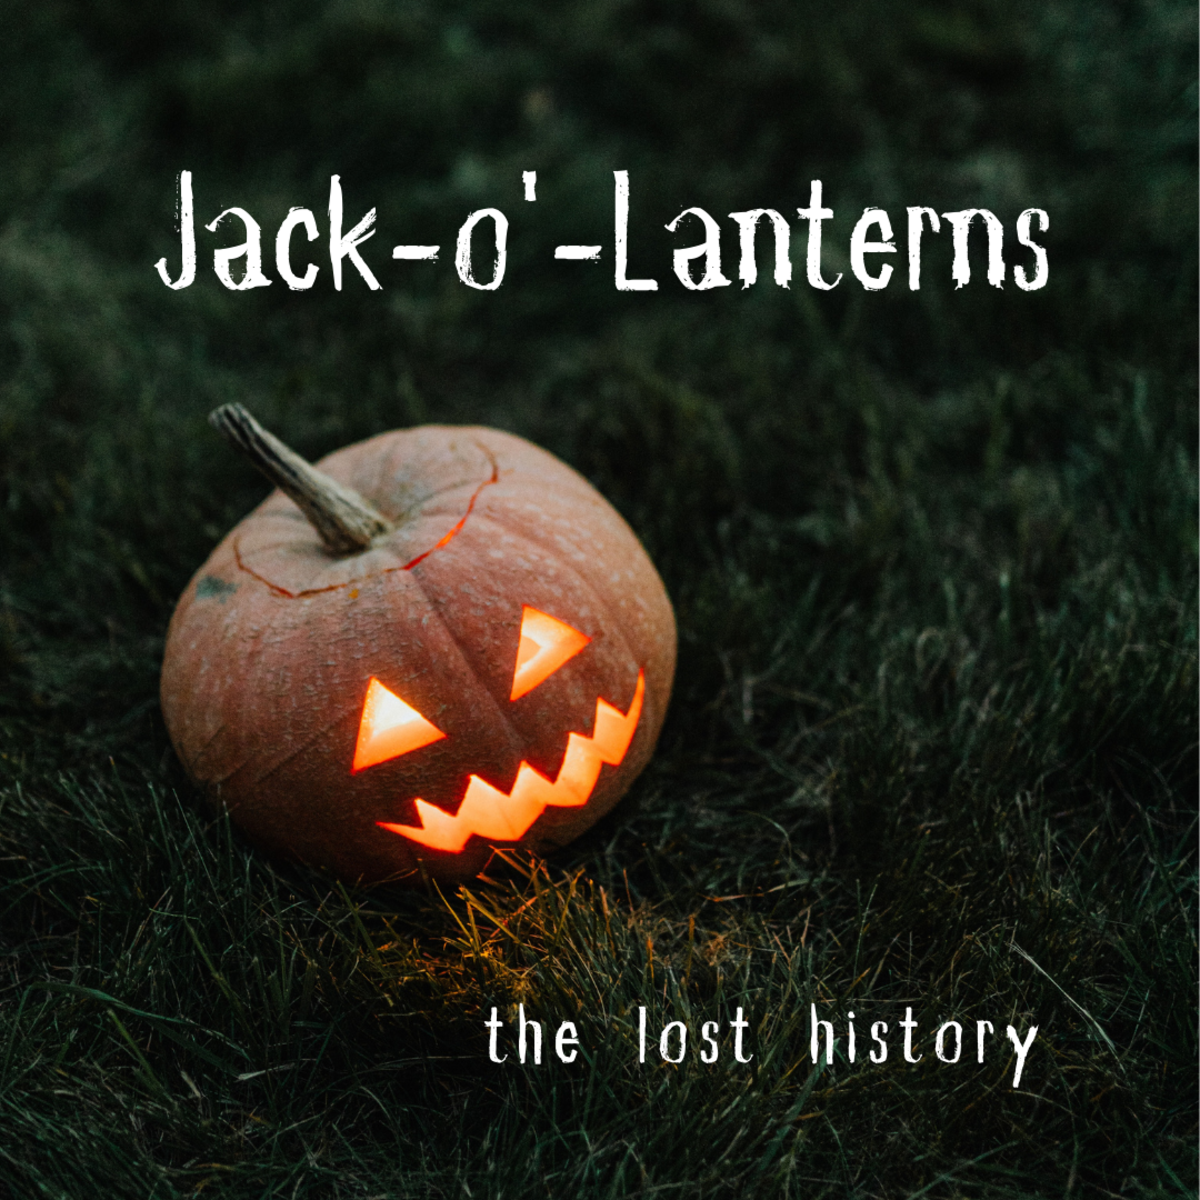 Let's explore the history of the Jack-'o-Lantern.